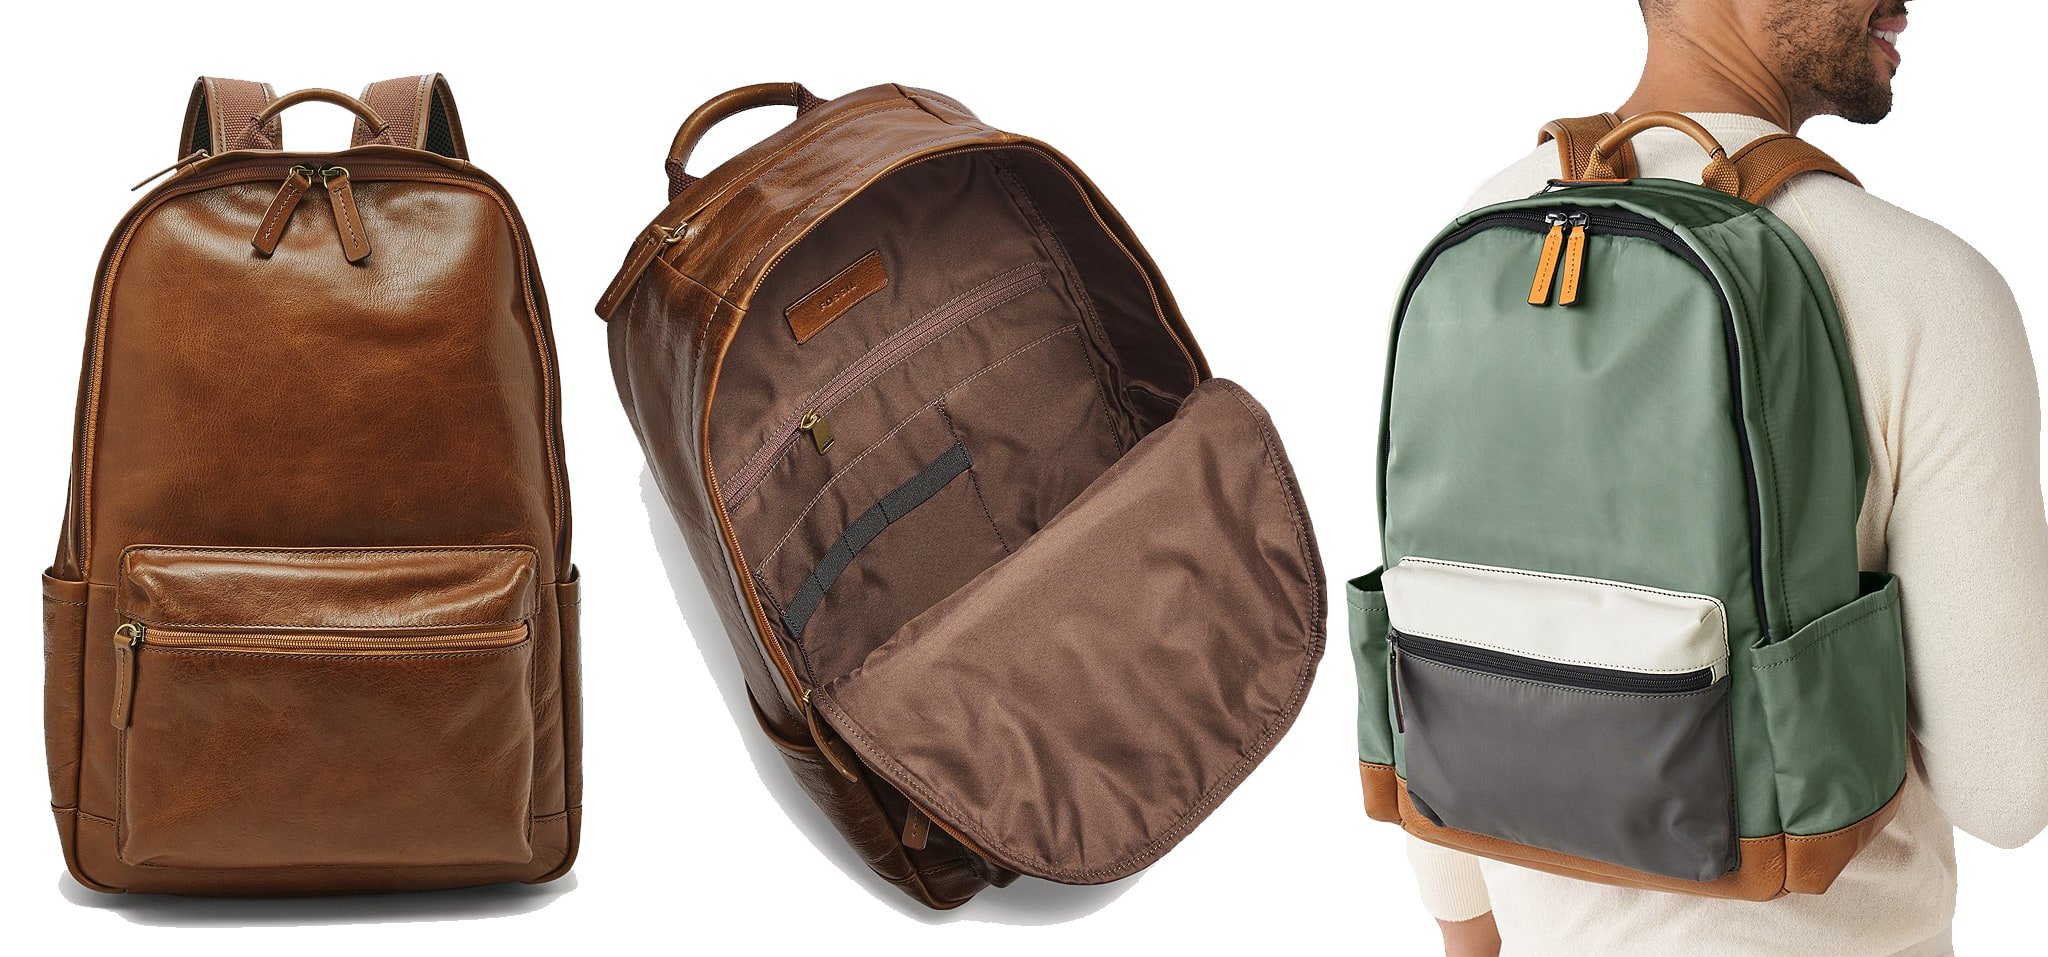 The Bucker Backpack can fit a 15-inch laptop and comes with a back luggage strap for easy travel